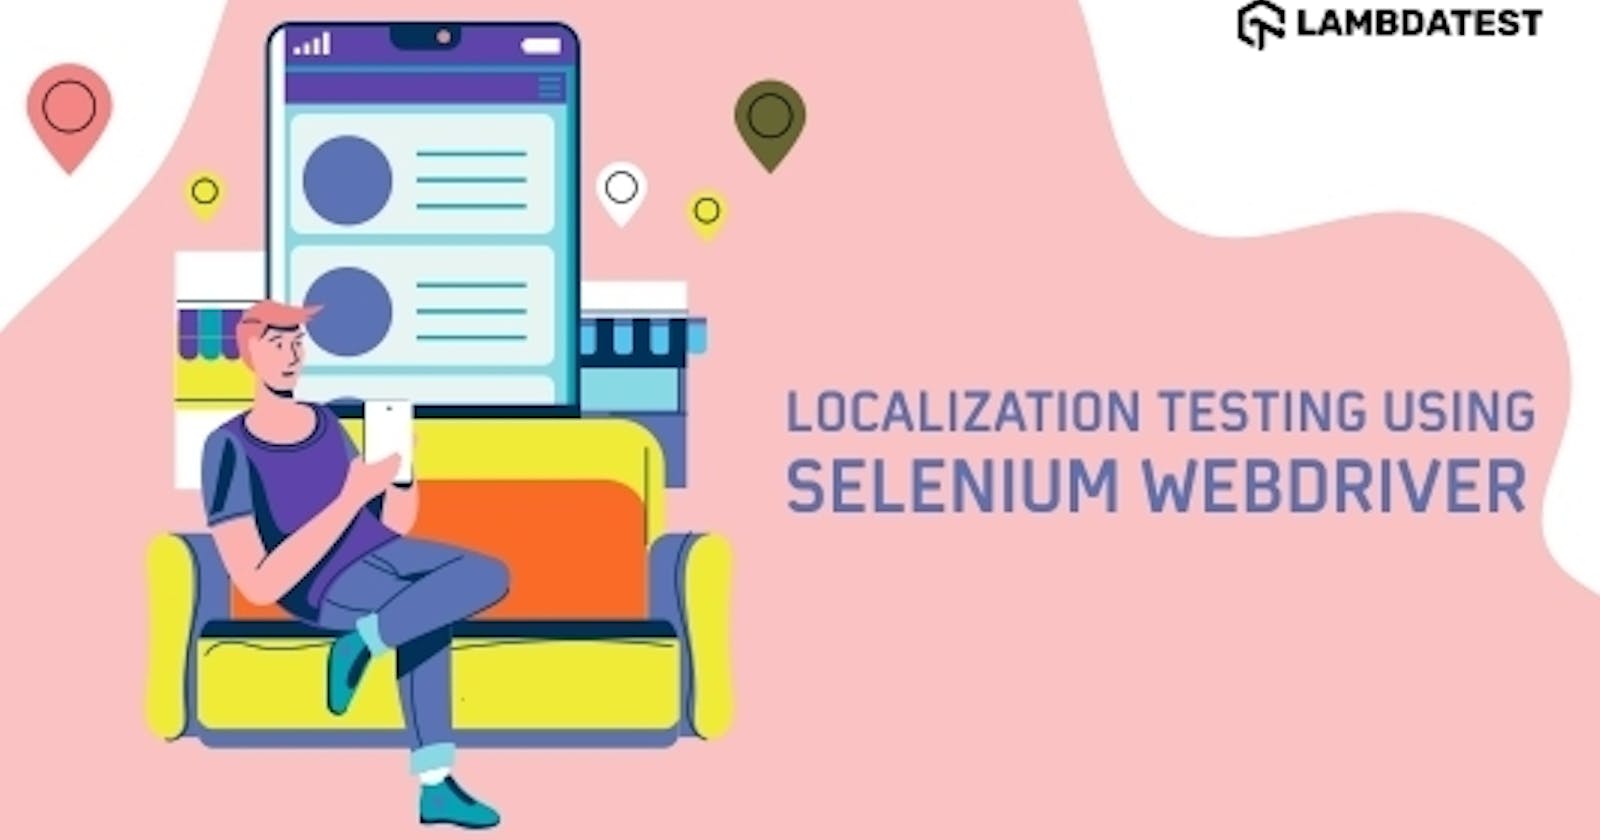 How To Perform Localization Testing Using Selenium WebDriver?